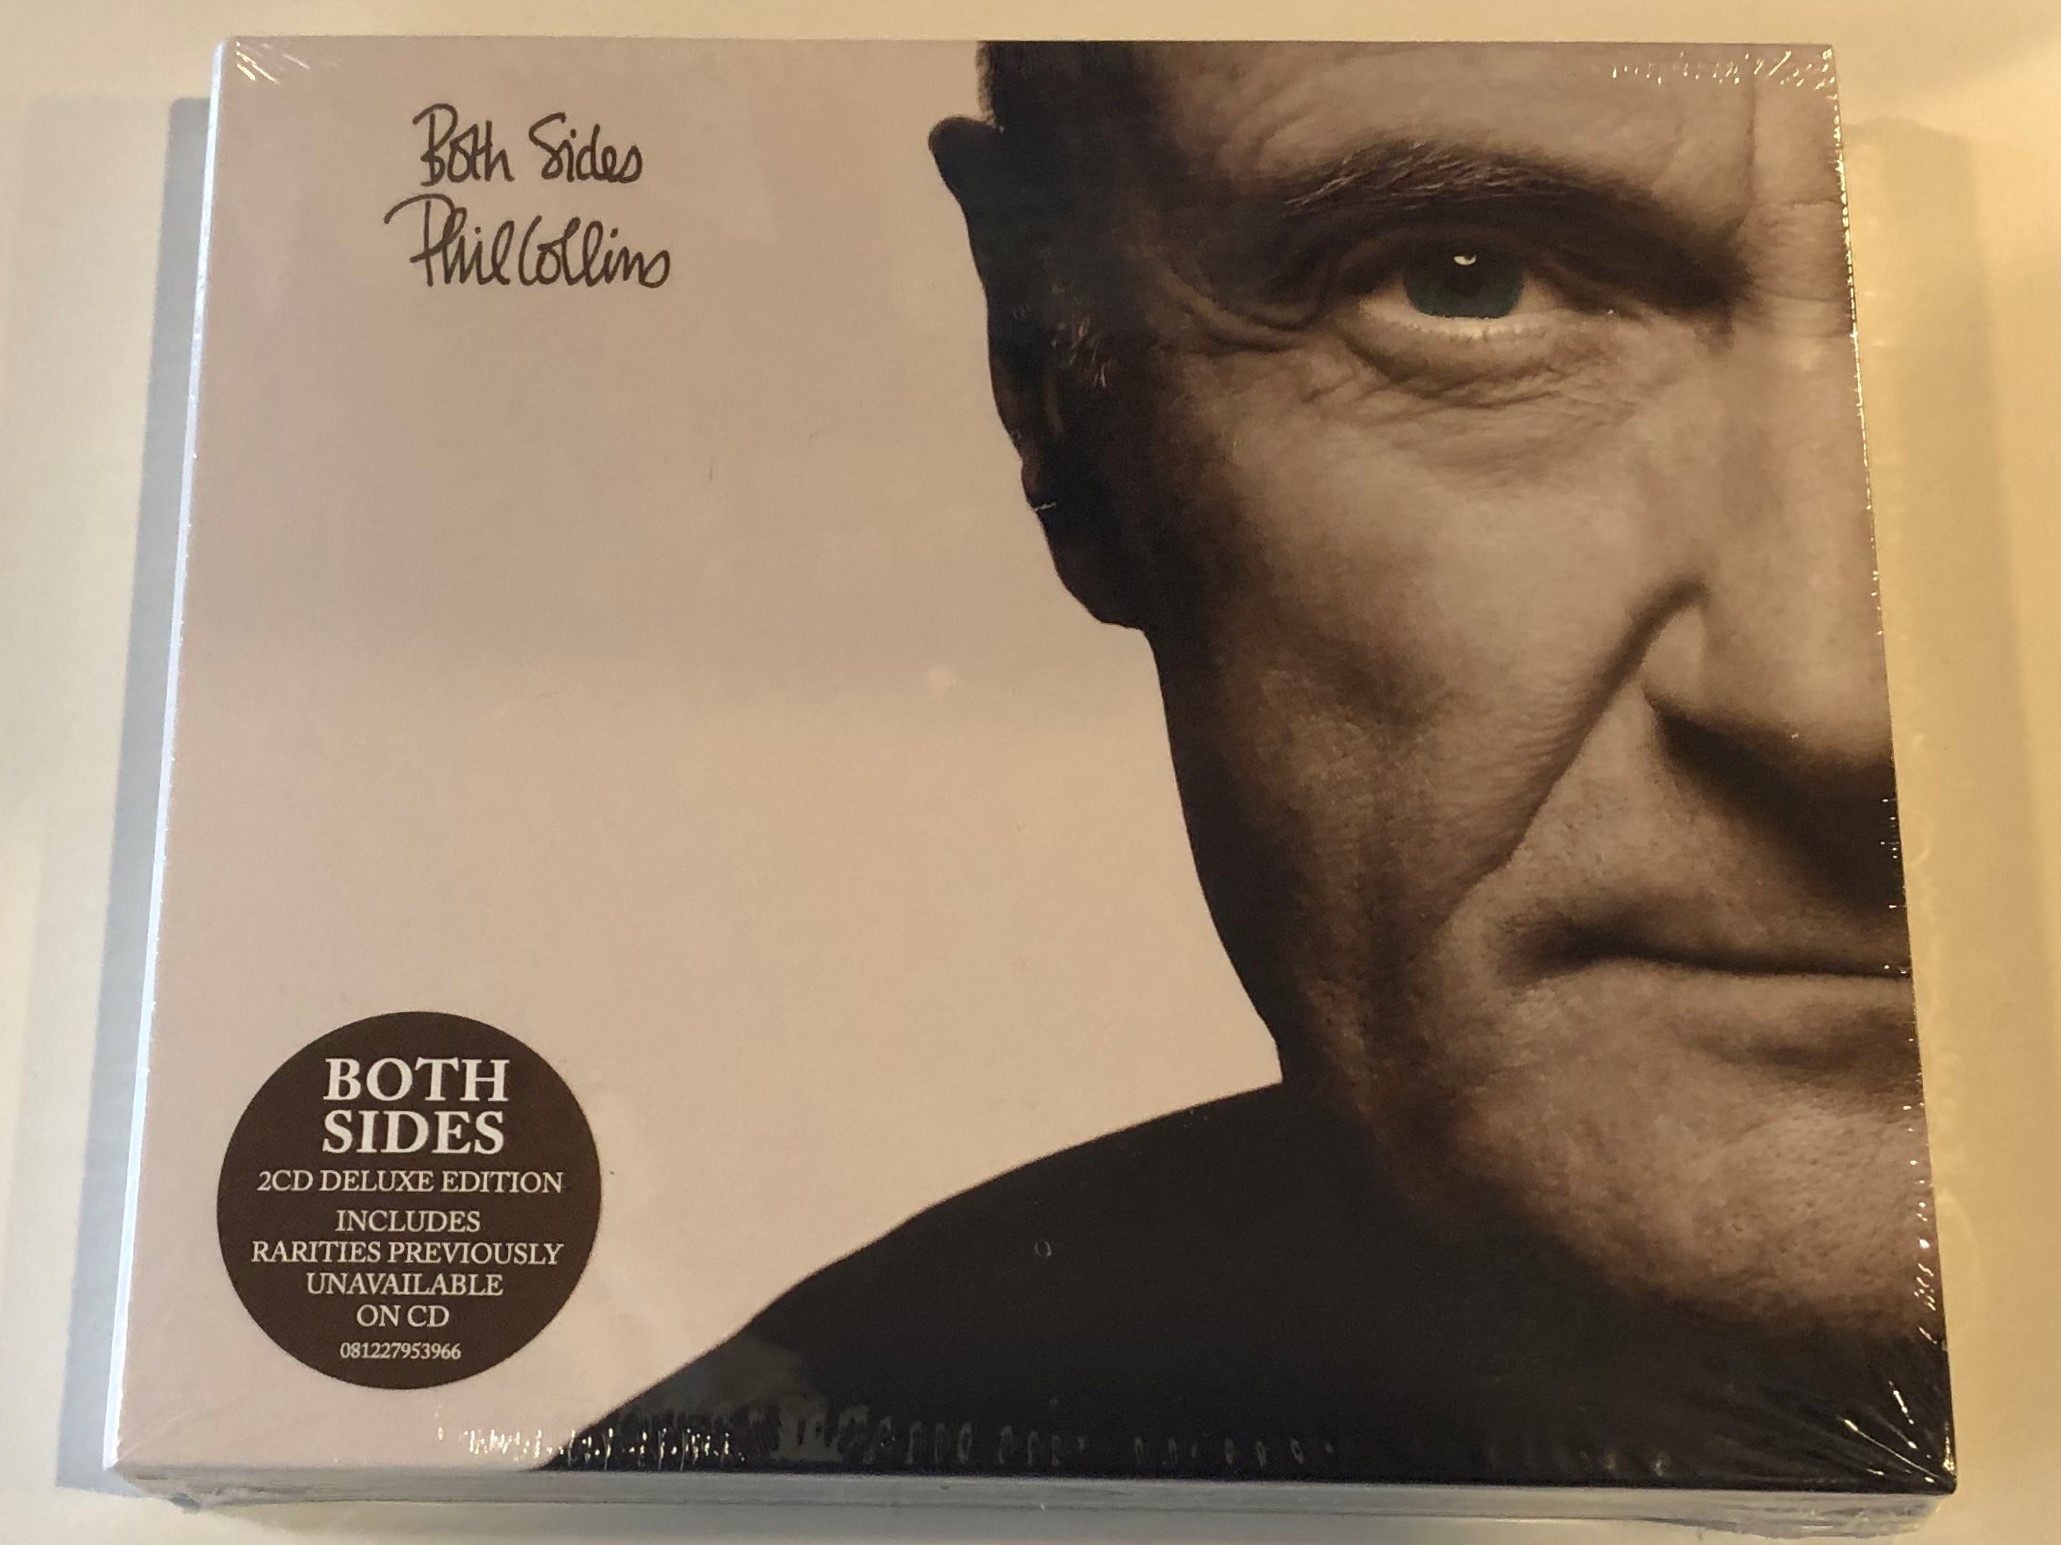 both-sides-phil-collins-2cd-deluxe-edition-includes-rarities-previlously-unavailable-on-cd-atlantic-2x-audio-cd-2015-081227953966-1-.jpg